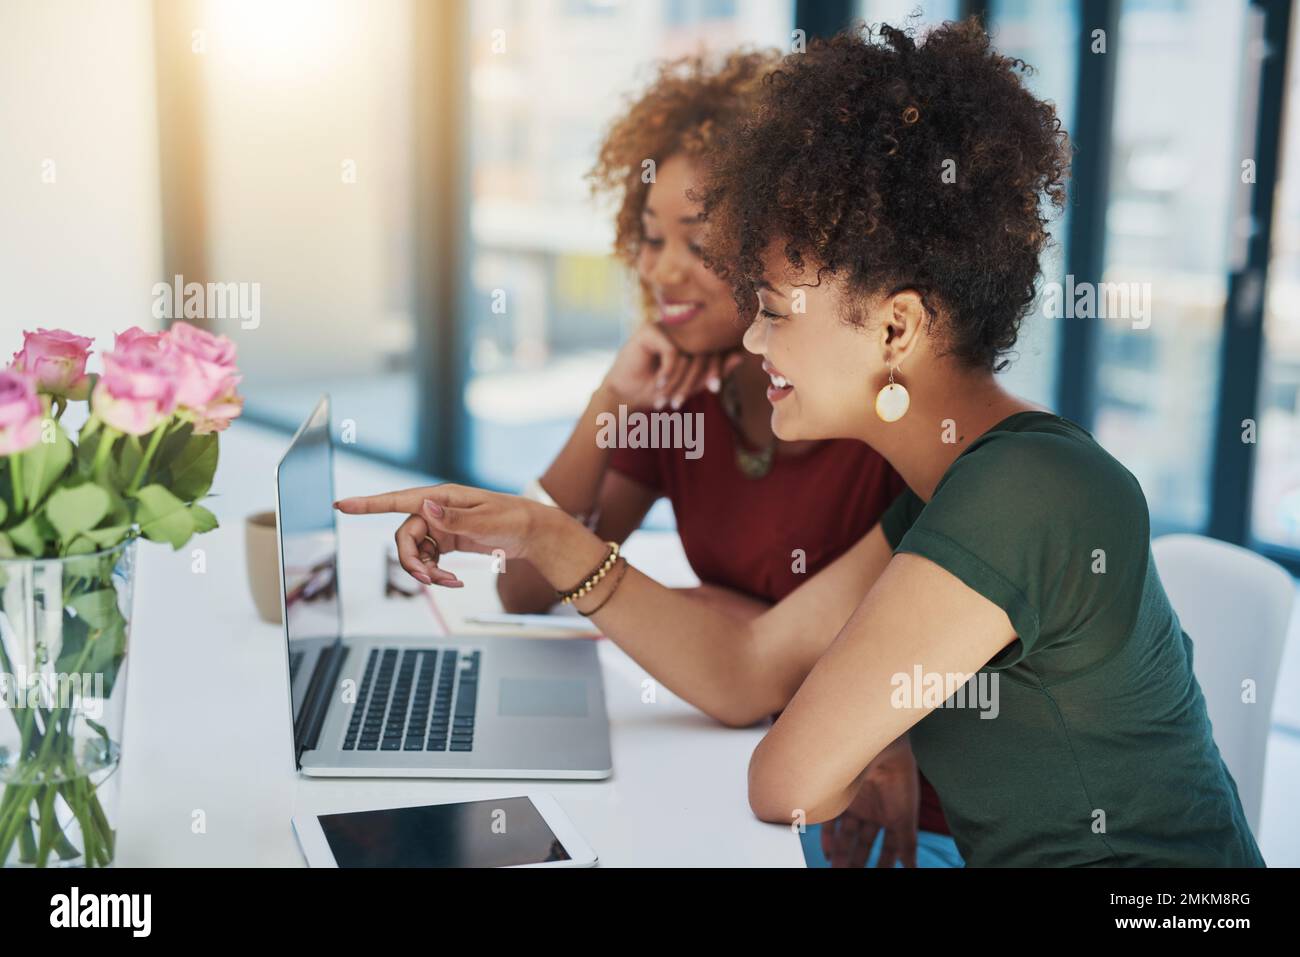 This one looks perfect. two young designers working on a laptop together. Stock Photo